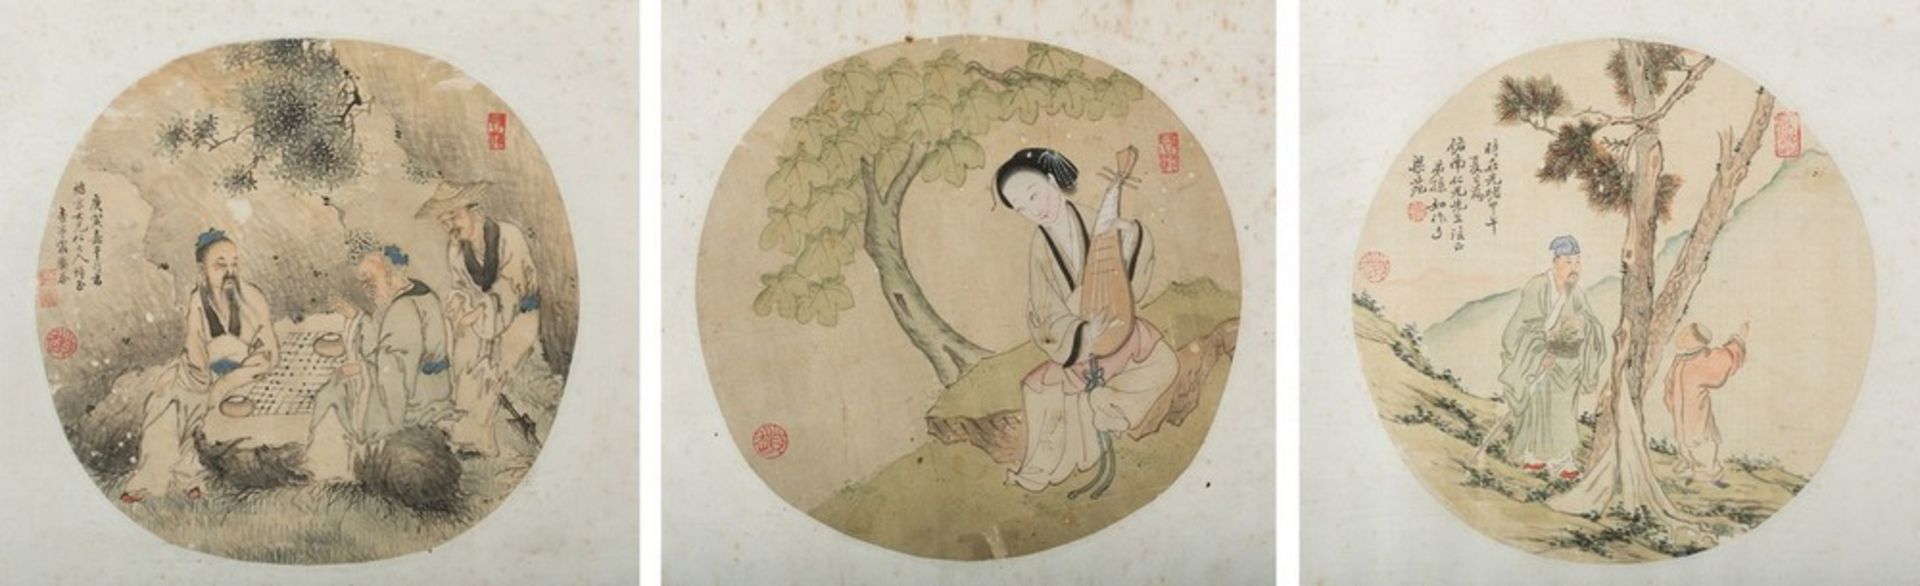 Arte Cinese Three round paintings on silk depicting characters in landscape China, Qing dynasty, 19